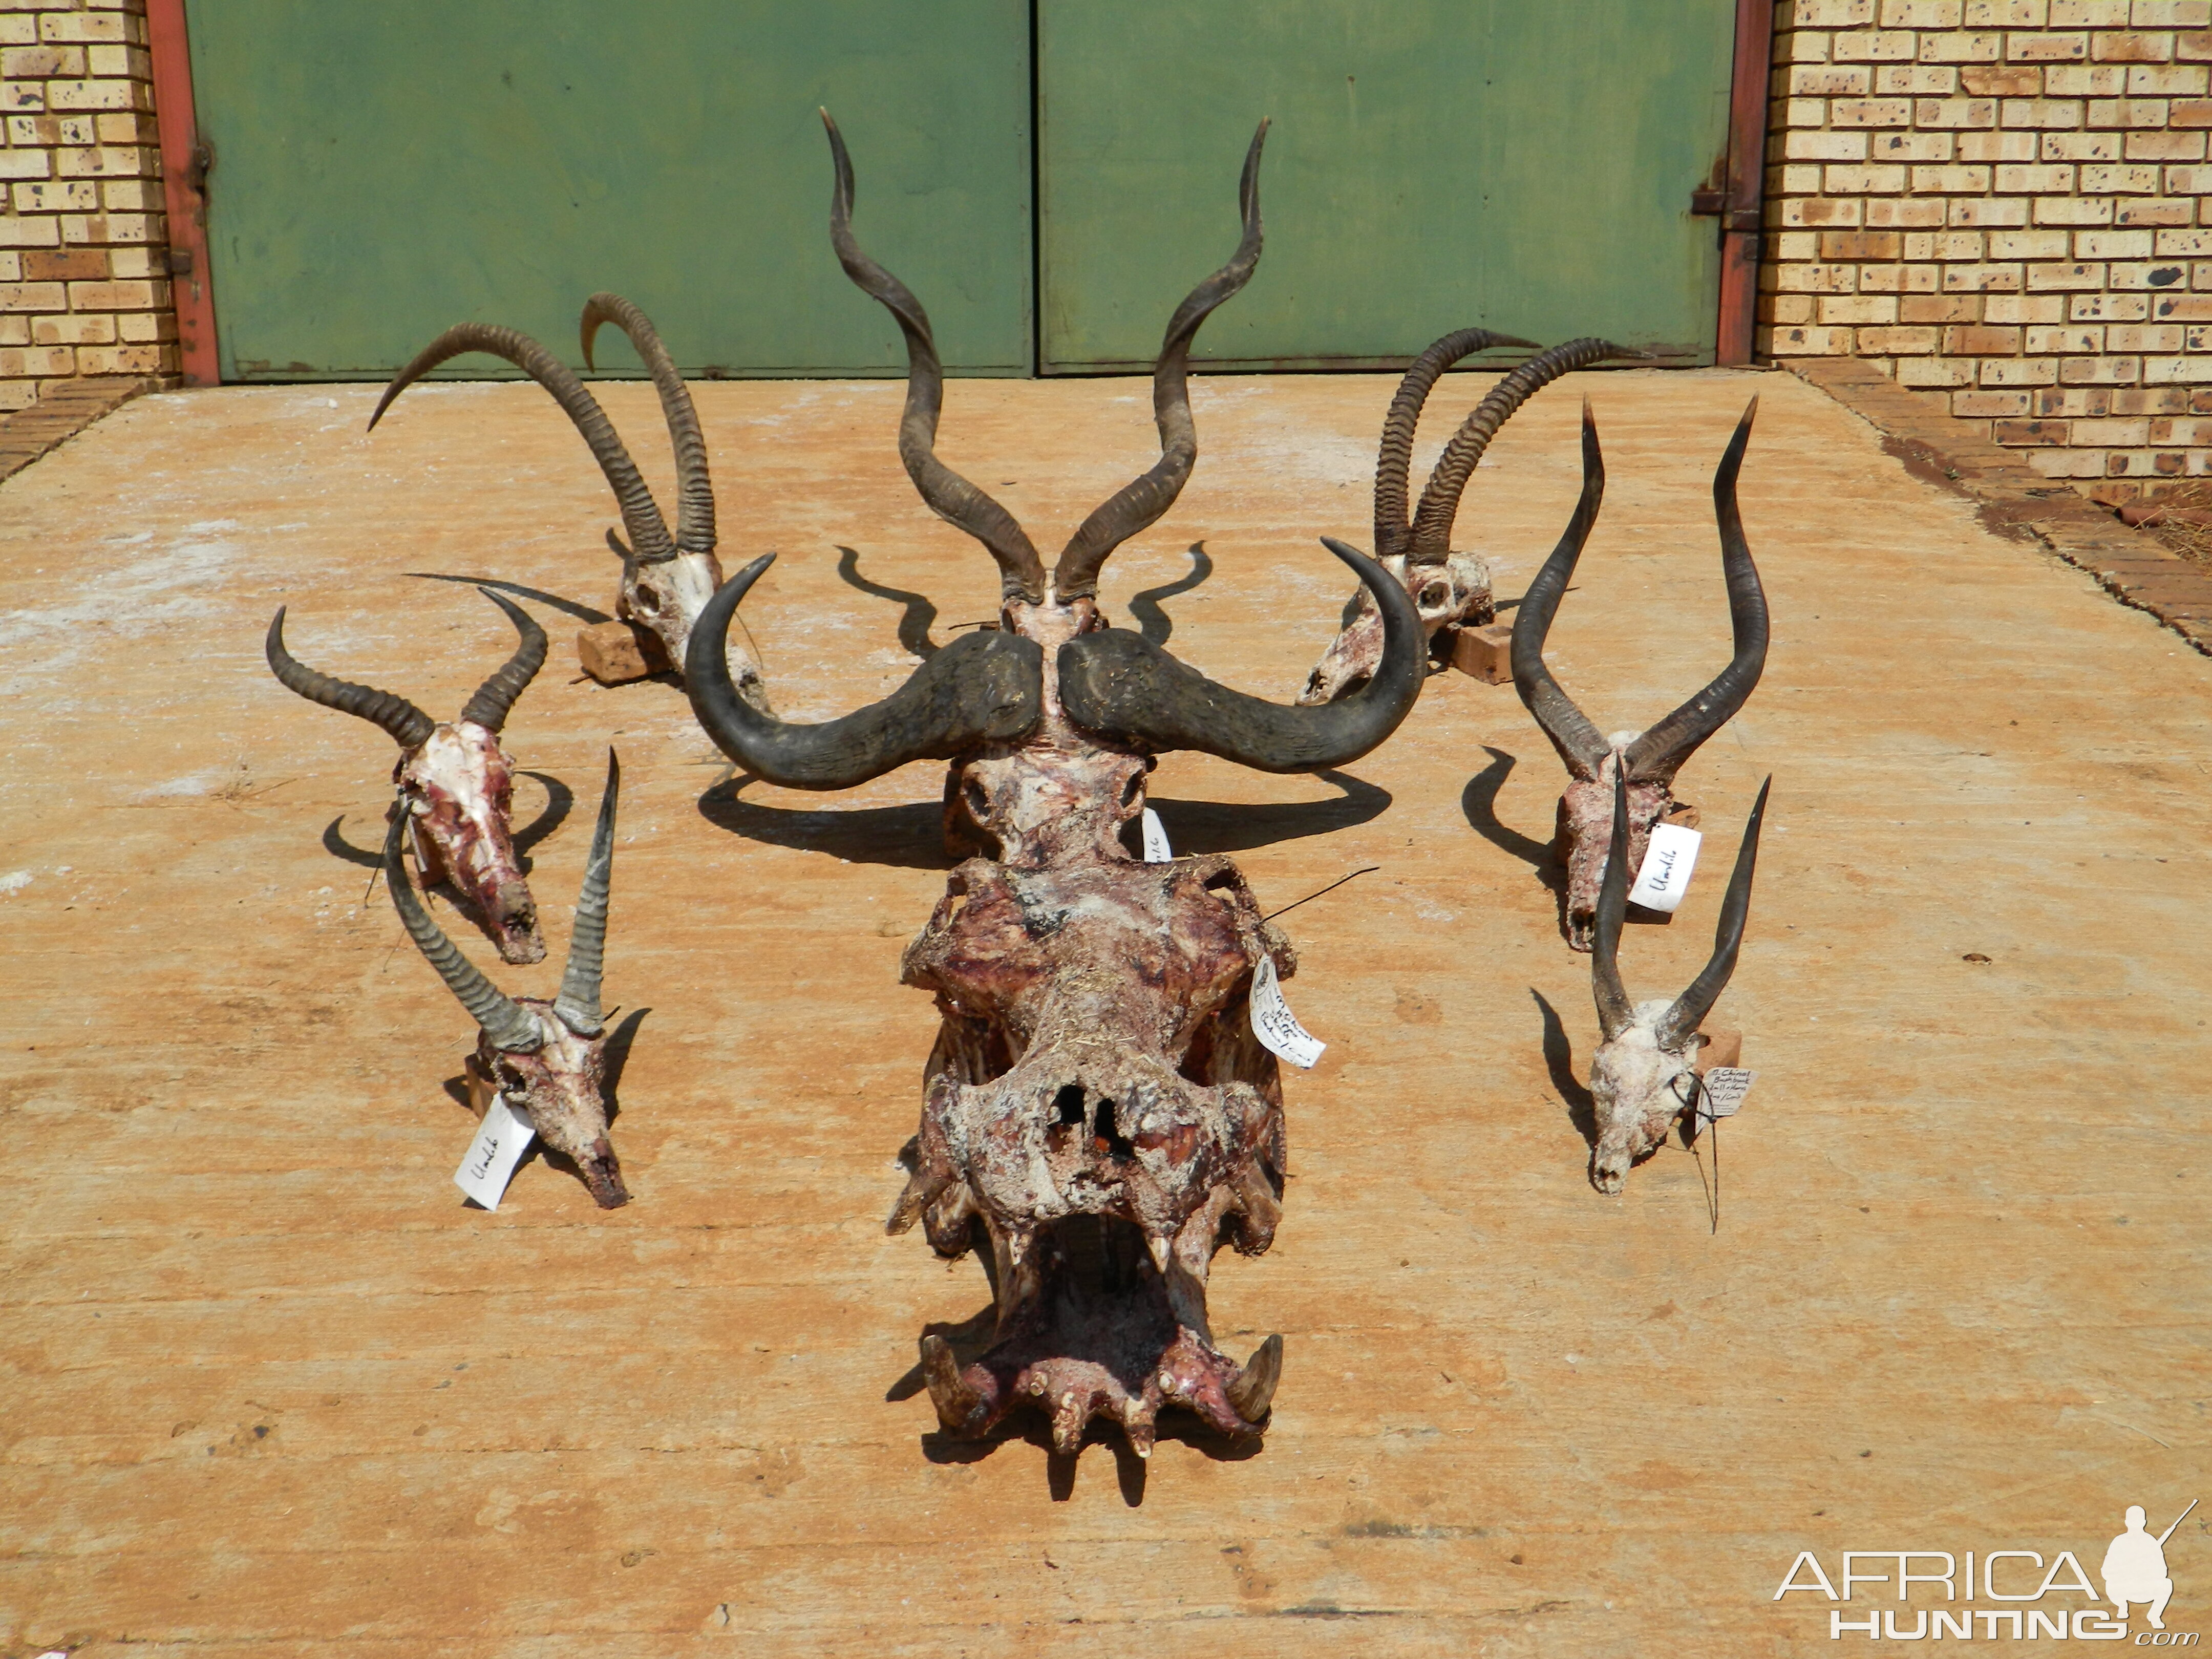 All Trophies of the Safari South Africa